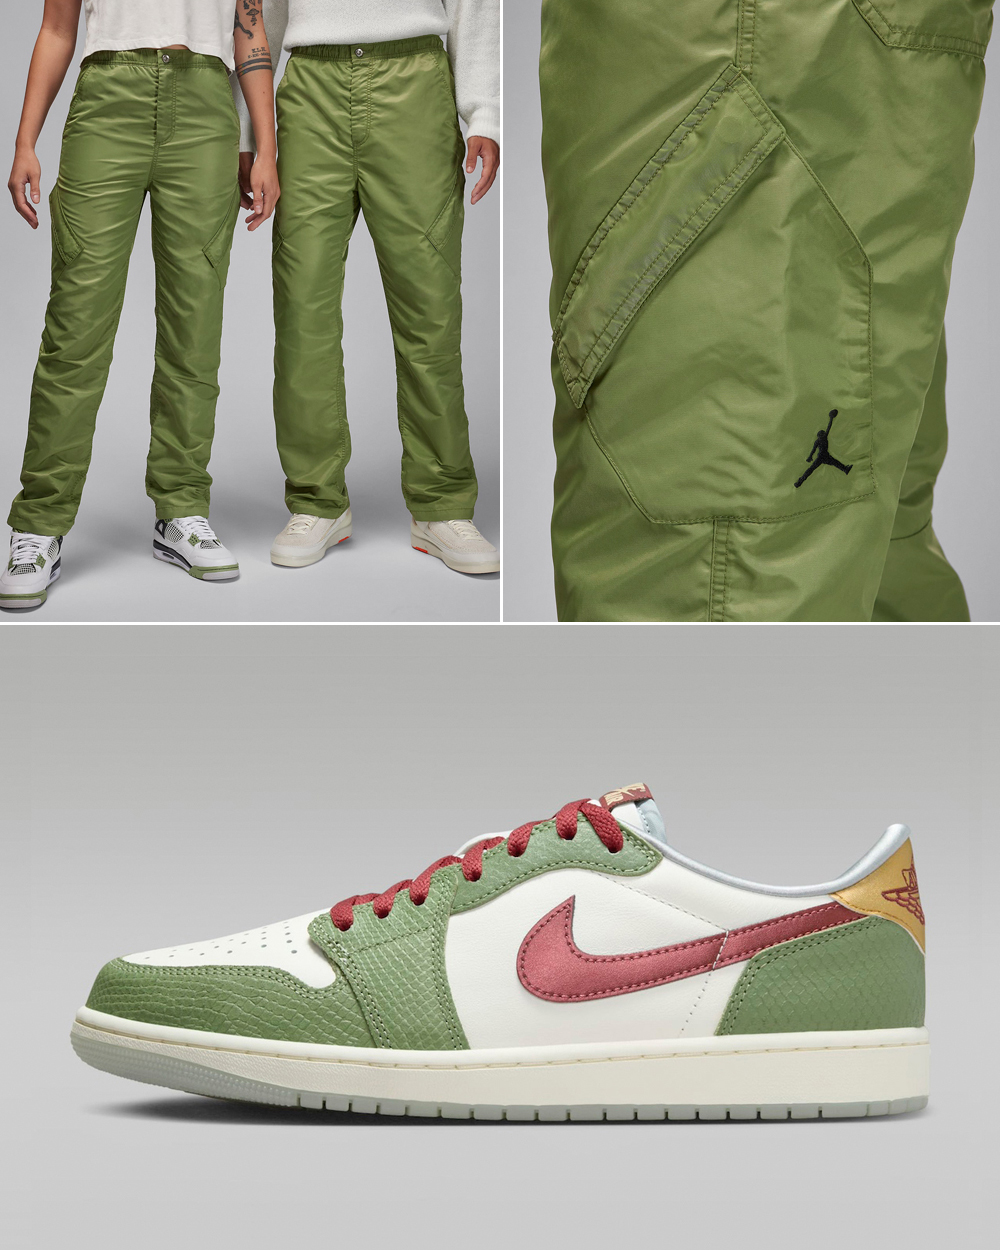 Air-Jordan-1-Low-OG-Year-of-the-Dragon-Chinese-New-Year-Pants-3